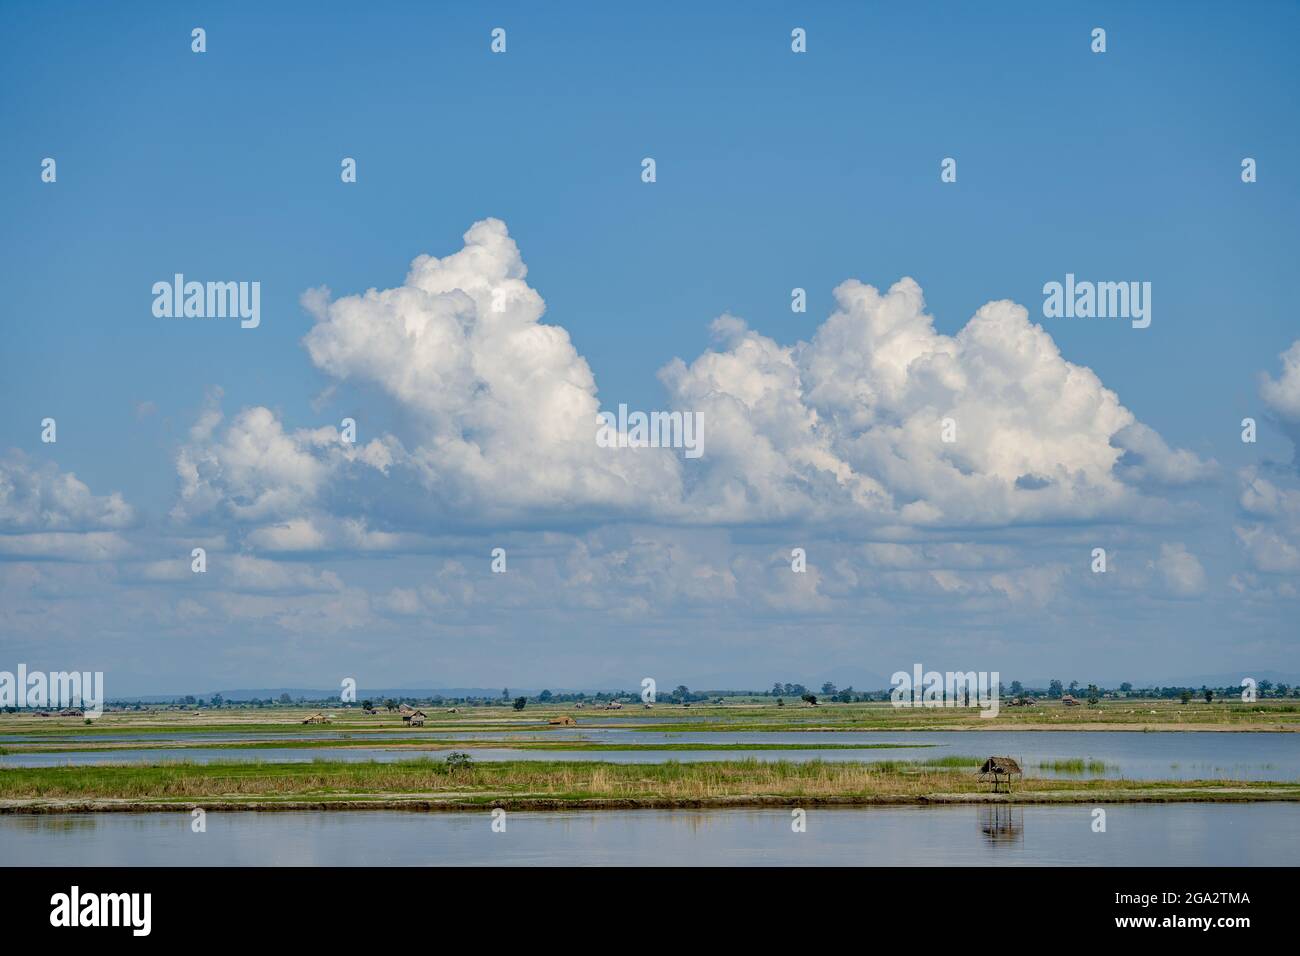 Clouds over the banks of the Ayeyarwady (Irrawaddy) river, in Kachin State, Myanmar/Burma Stock Photo